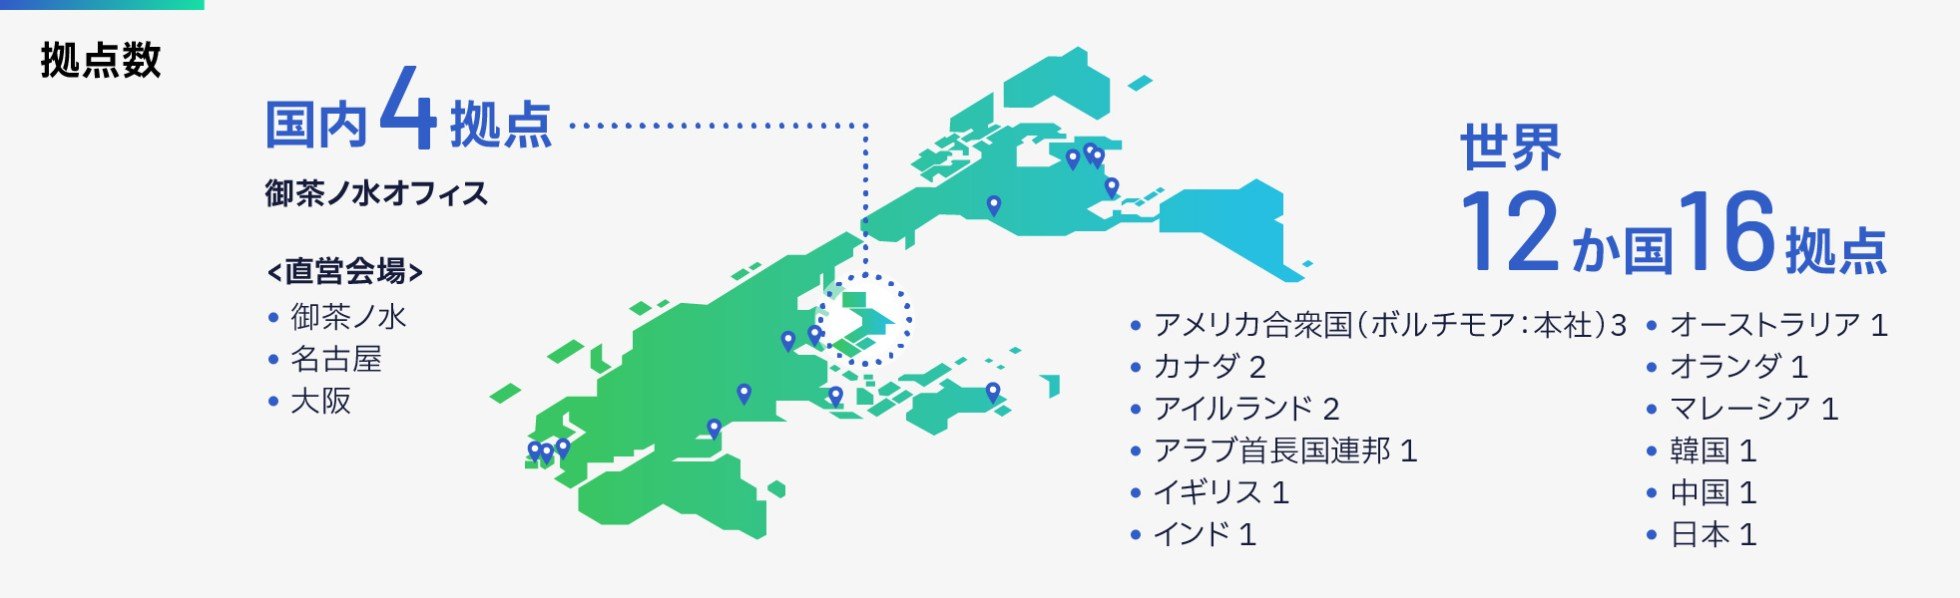 Number of locations: 4 locations in Japan (Ochanomizu office and directly managed Test Center in Ochanomizu, Nagoya, and Osaka), 16 locations in 12 countries around the world (3 locations in the United States [Baltimore: headquarters], 2 locations in Canada, 2 locations in Ireland, 1 location in the United Arab Emirates) , 1 location in the UK, 1 location in India, 1 location in Australia, 1 location in the Netherlands, 1 location in Malaysia, 1 location in South Korea, 1 location in China, 1 location in Japan)